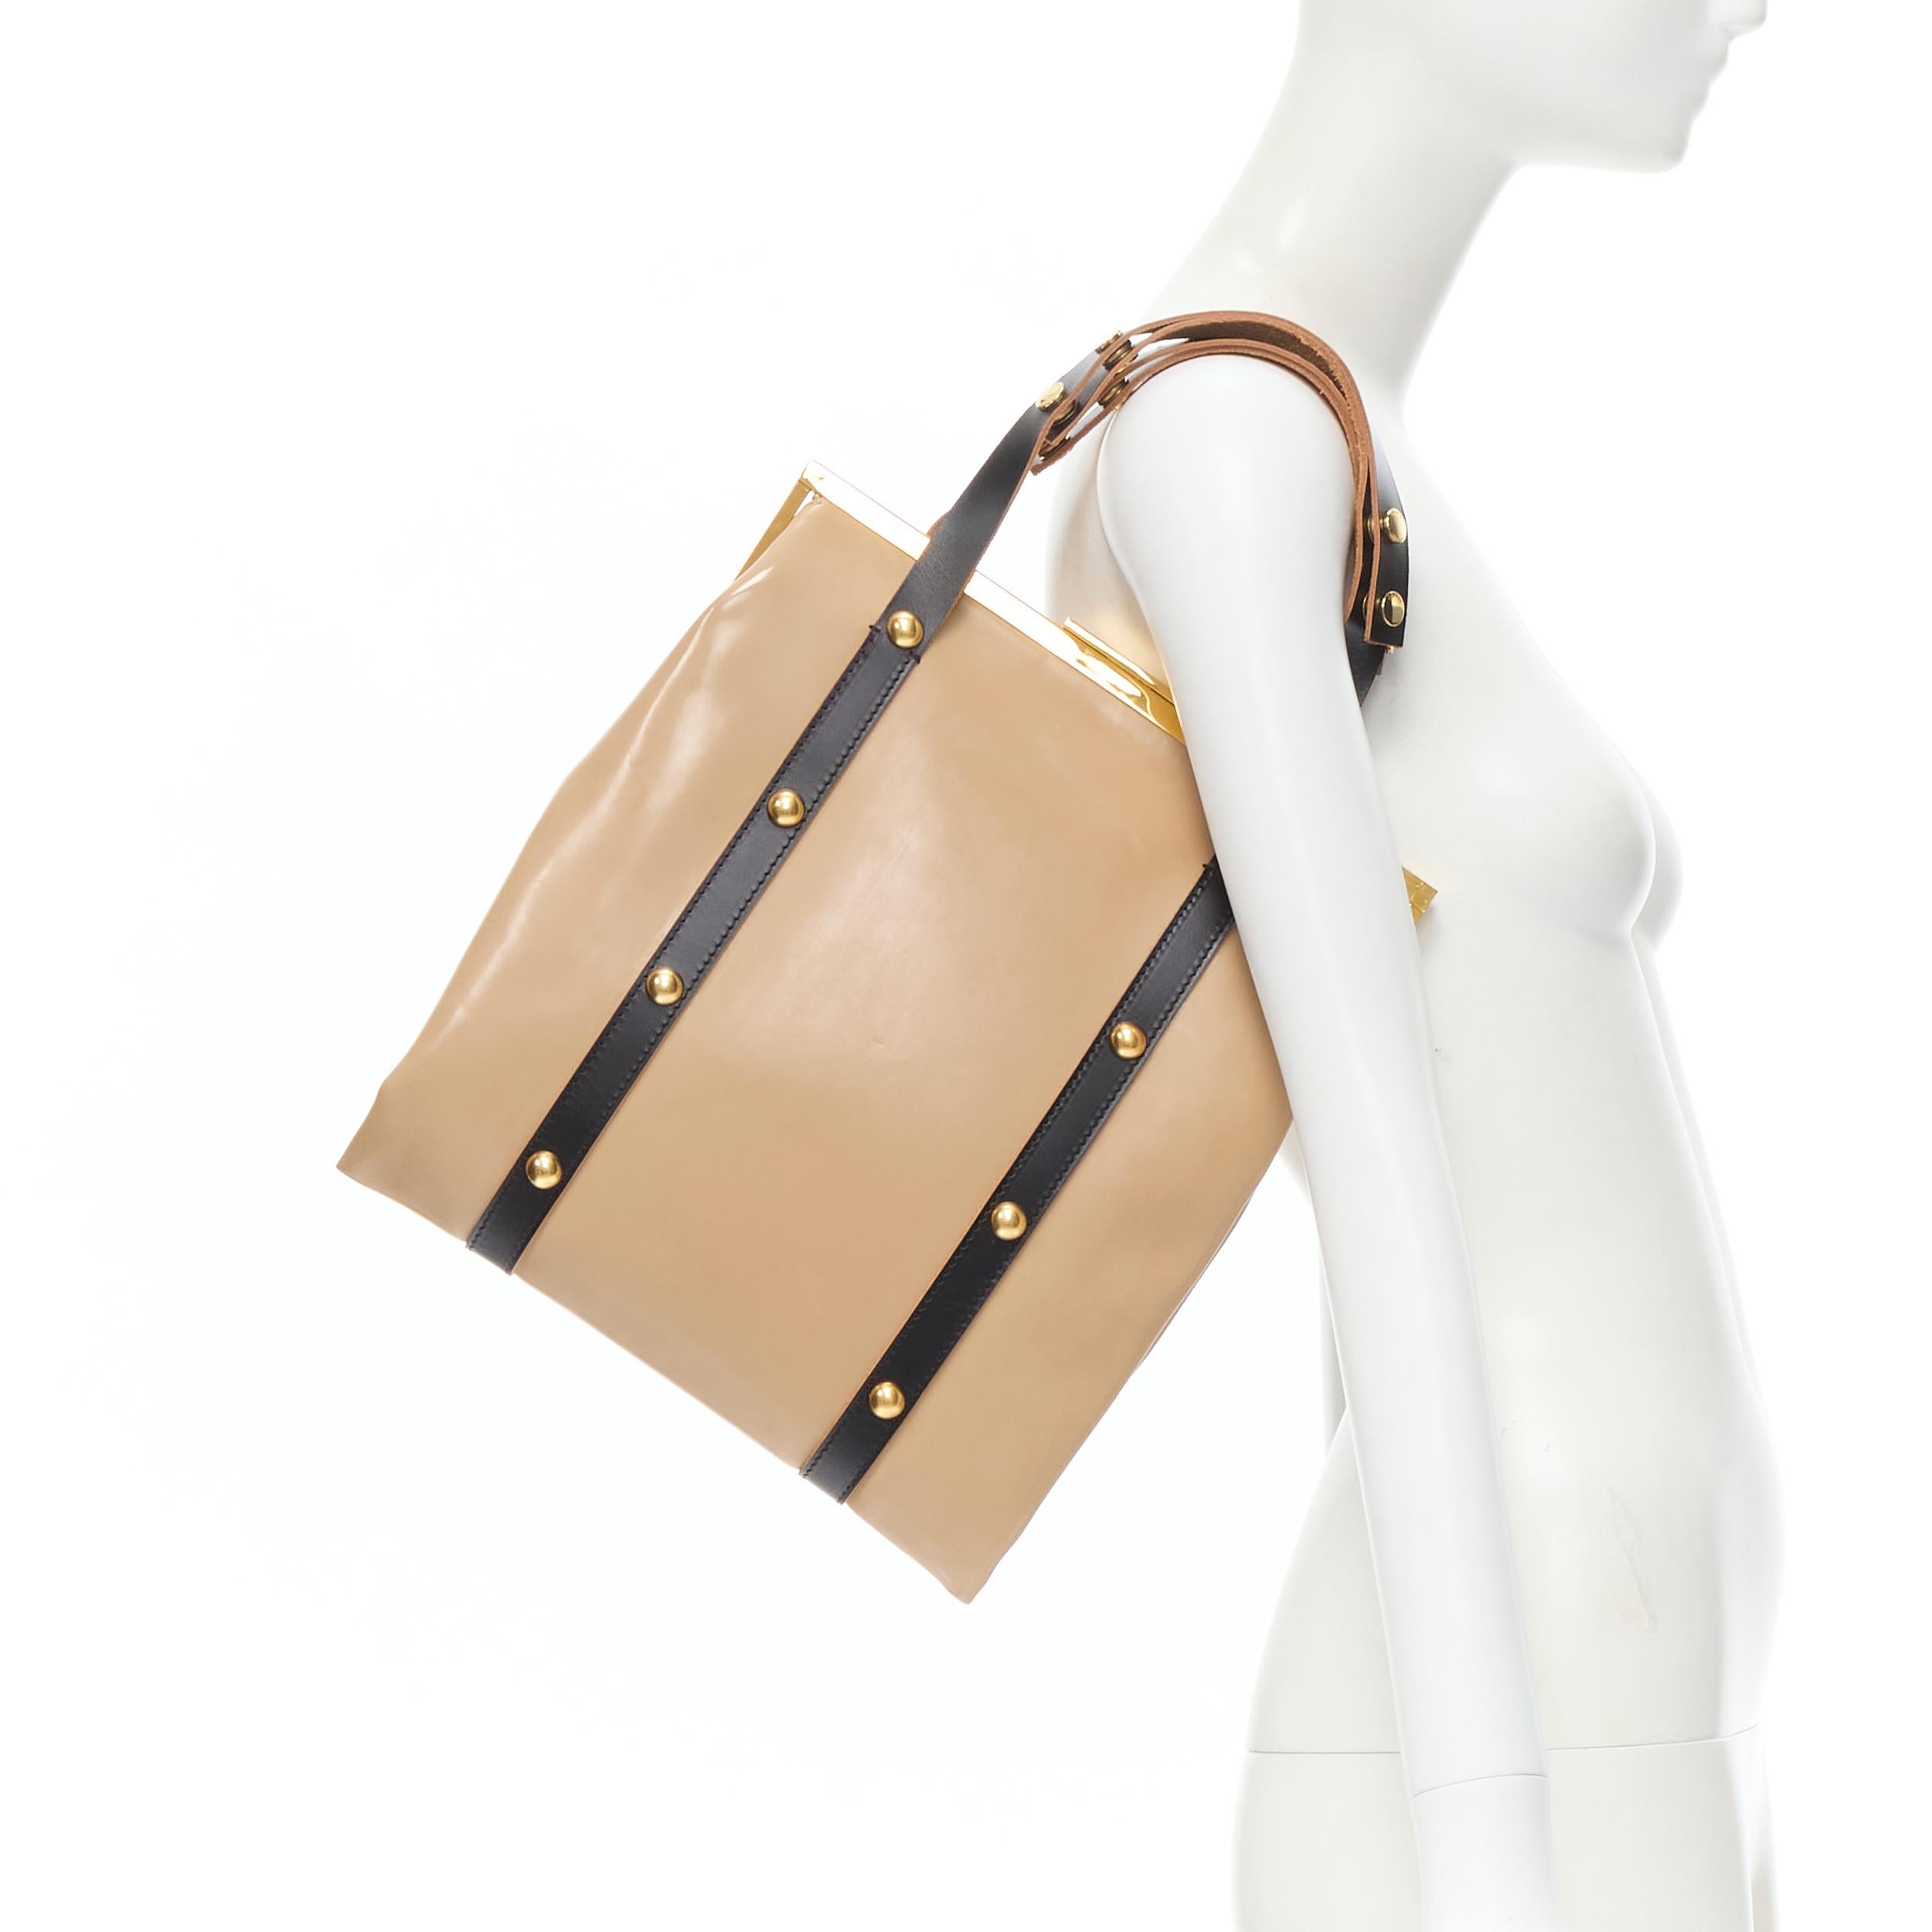 MARNI brown latex PVC gold stud leather trim metal frame tote bag 
Reference: CELG/A00039 
Brand: Marni 
Model: Latex tote 
Material: Latex, leather 
Color: Brown 
Pattern: Solid 
Closure: Clasp 
Extra Detail: Clasp lock. 

CONDITION: 
Condition: